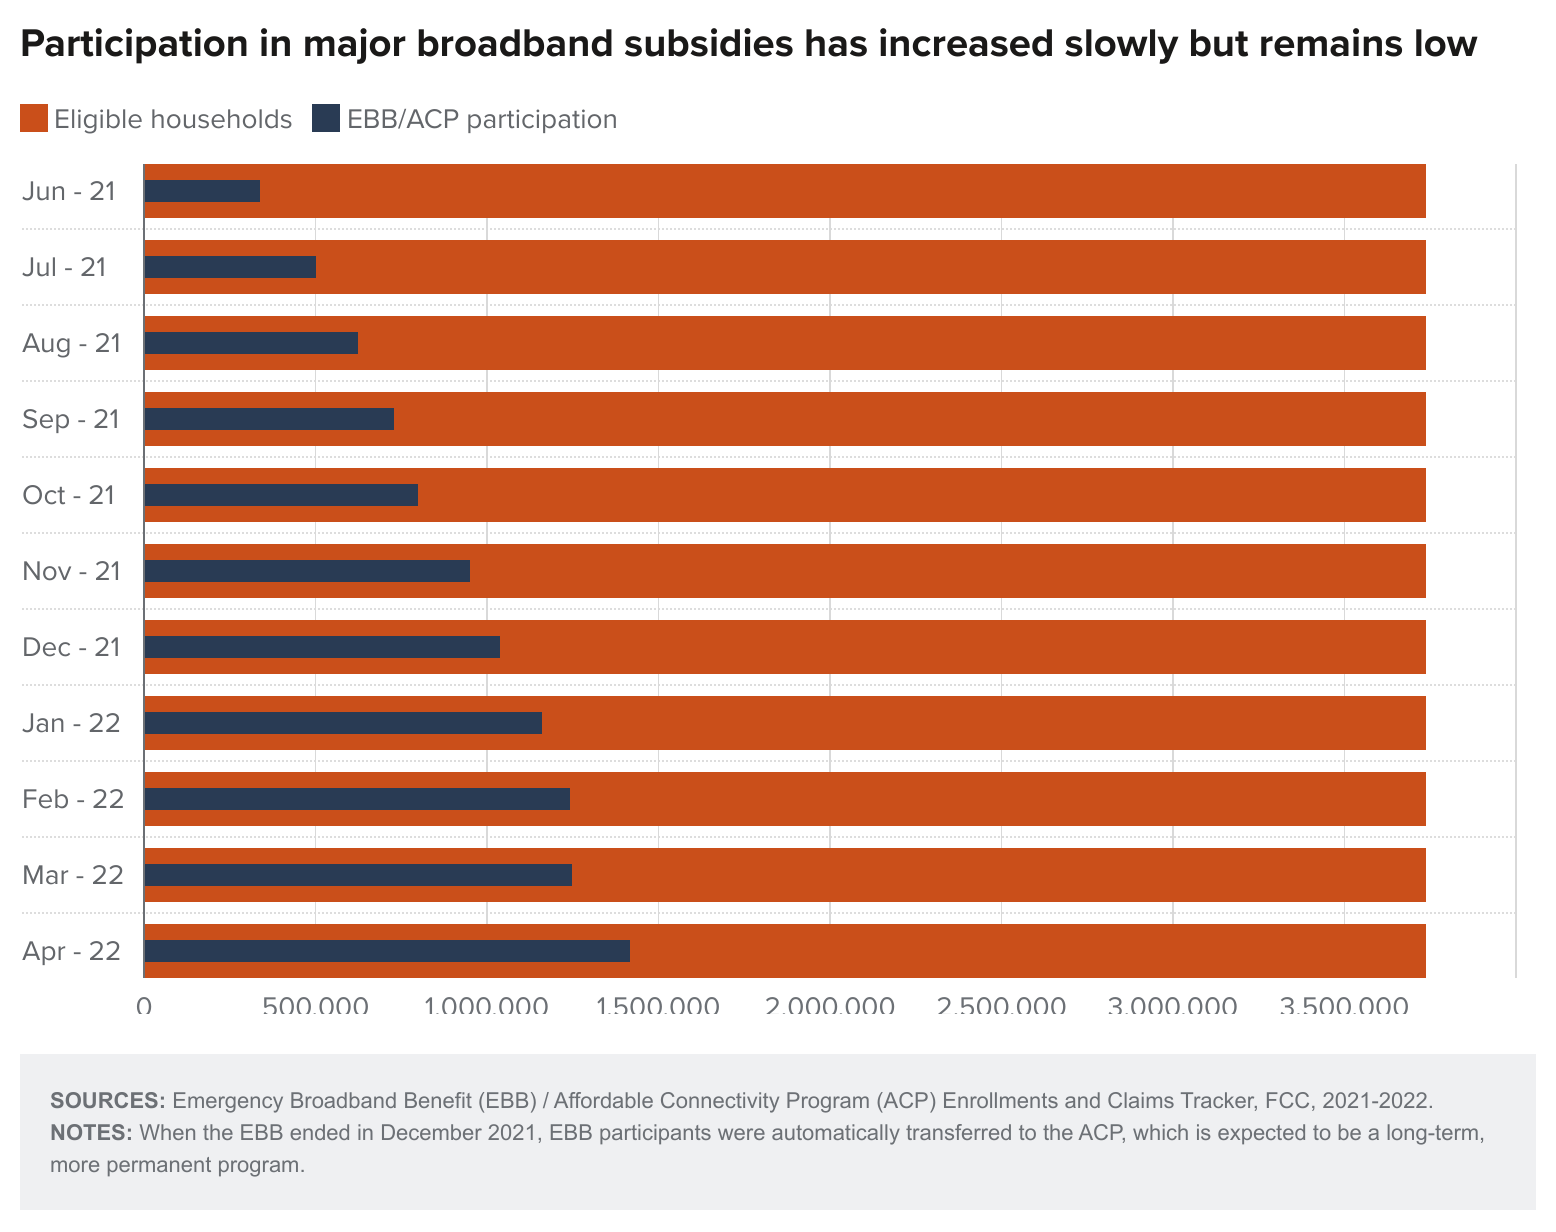 figure - Participation in major broadband subsidies has increased slowly but remains low